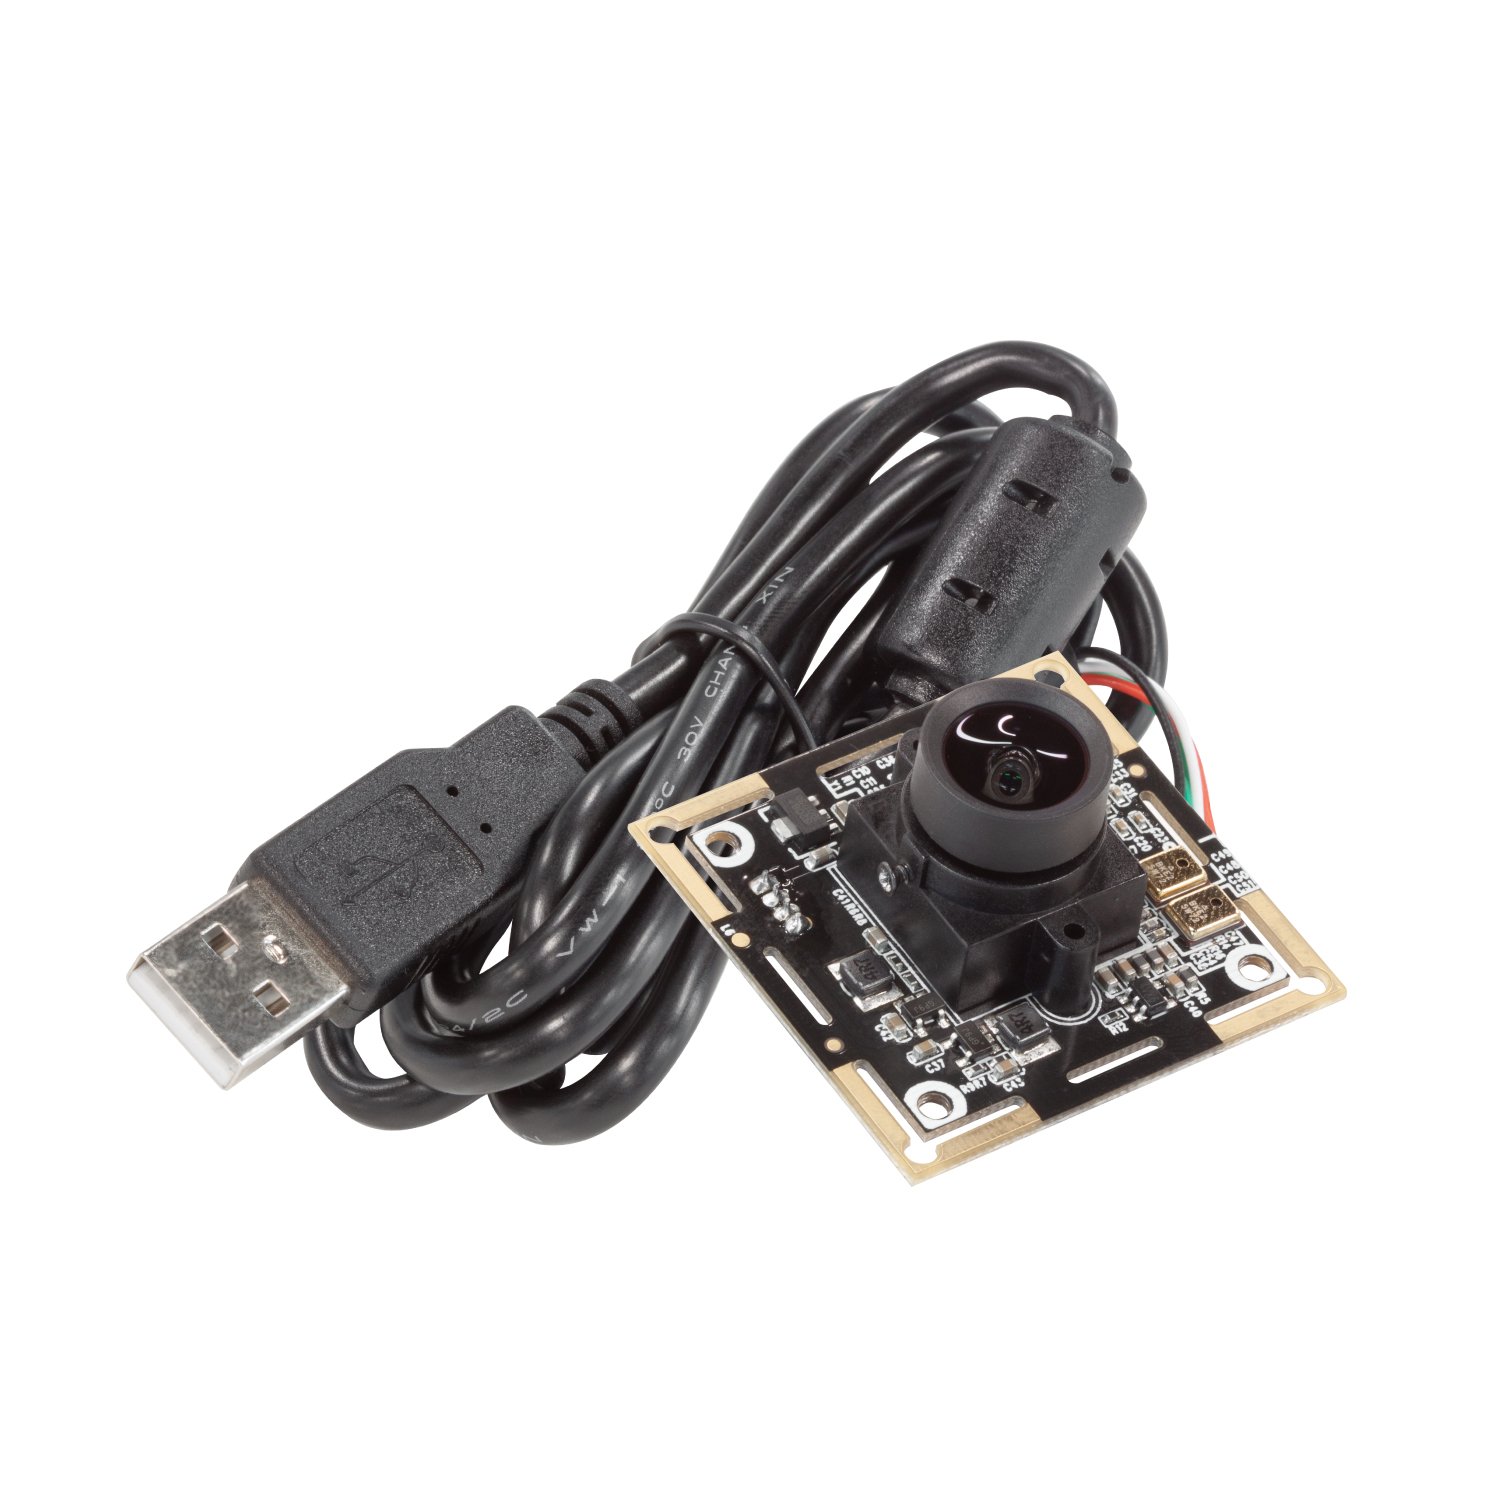 Arducam 3MP WDR USB Camera Board with M12 Lens, Dual Microphones 1